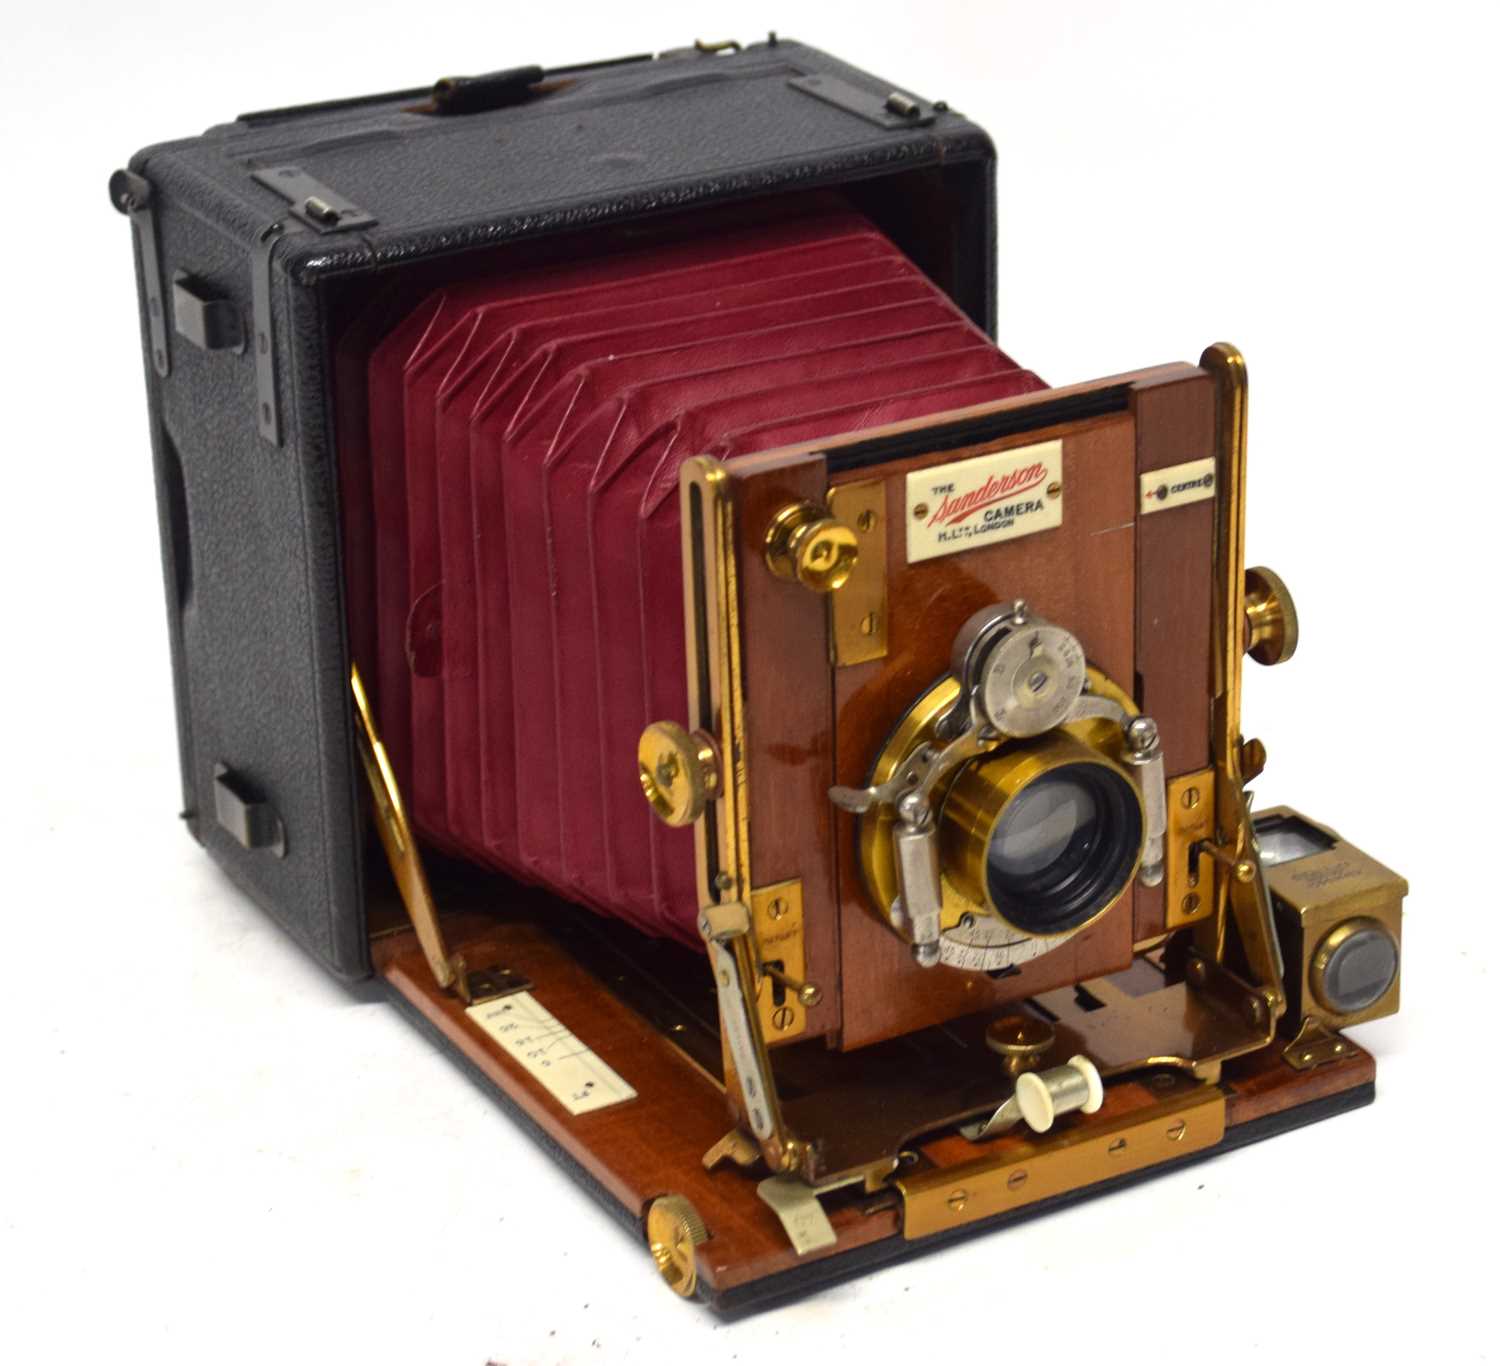 A RARE C1910 SANDERSON FIELD CAMERA COMPLETE WITH LEATHER CARRY CASE, INSTRUCTION MANUAL AND PLATES